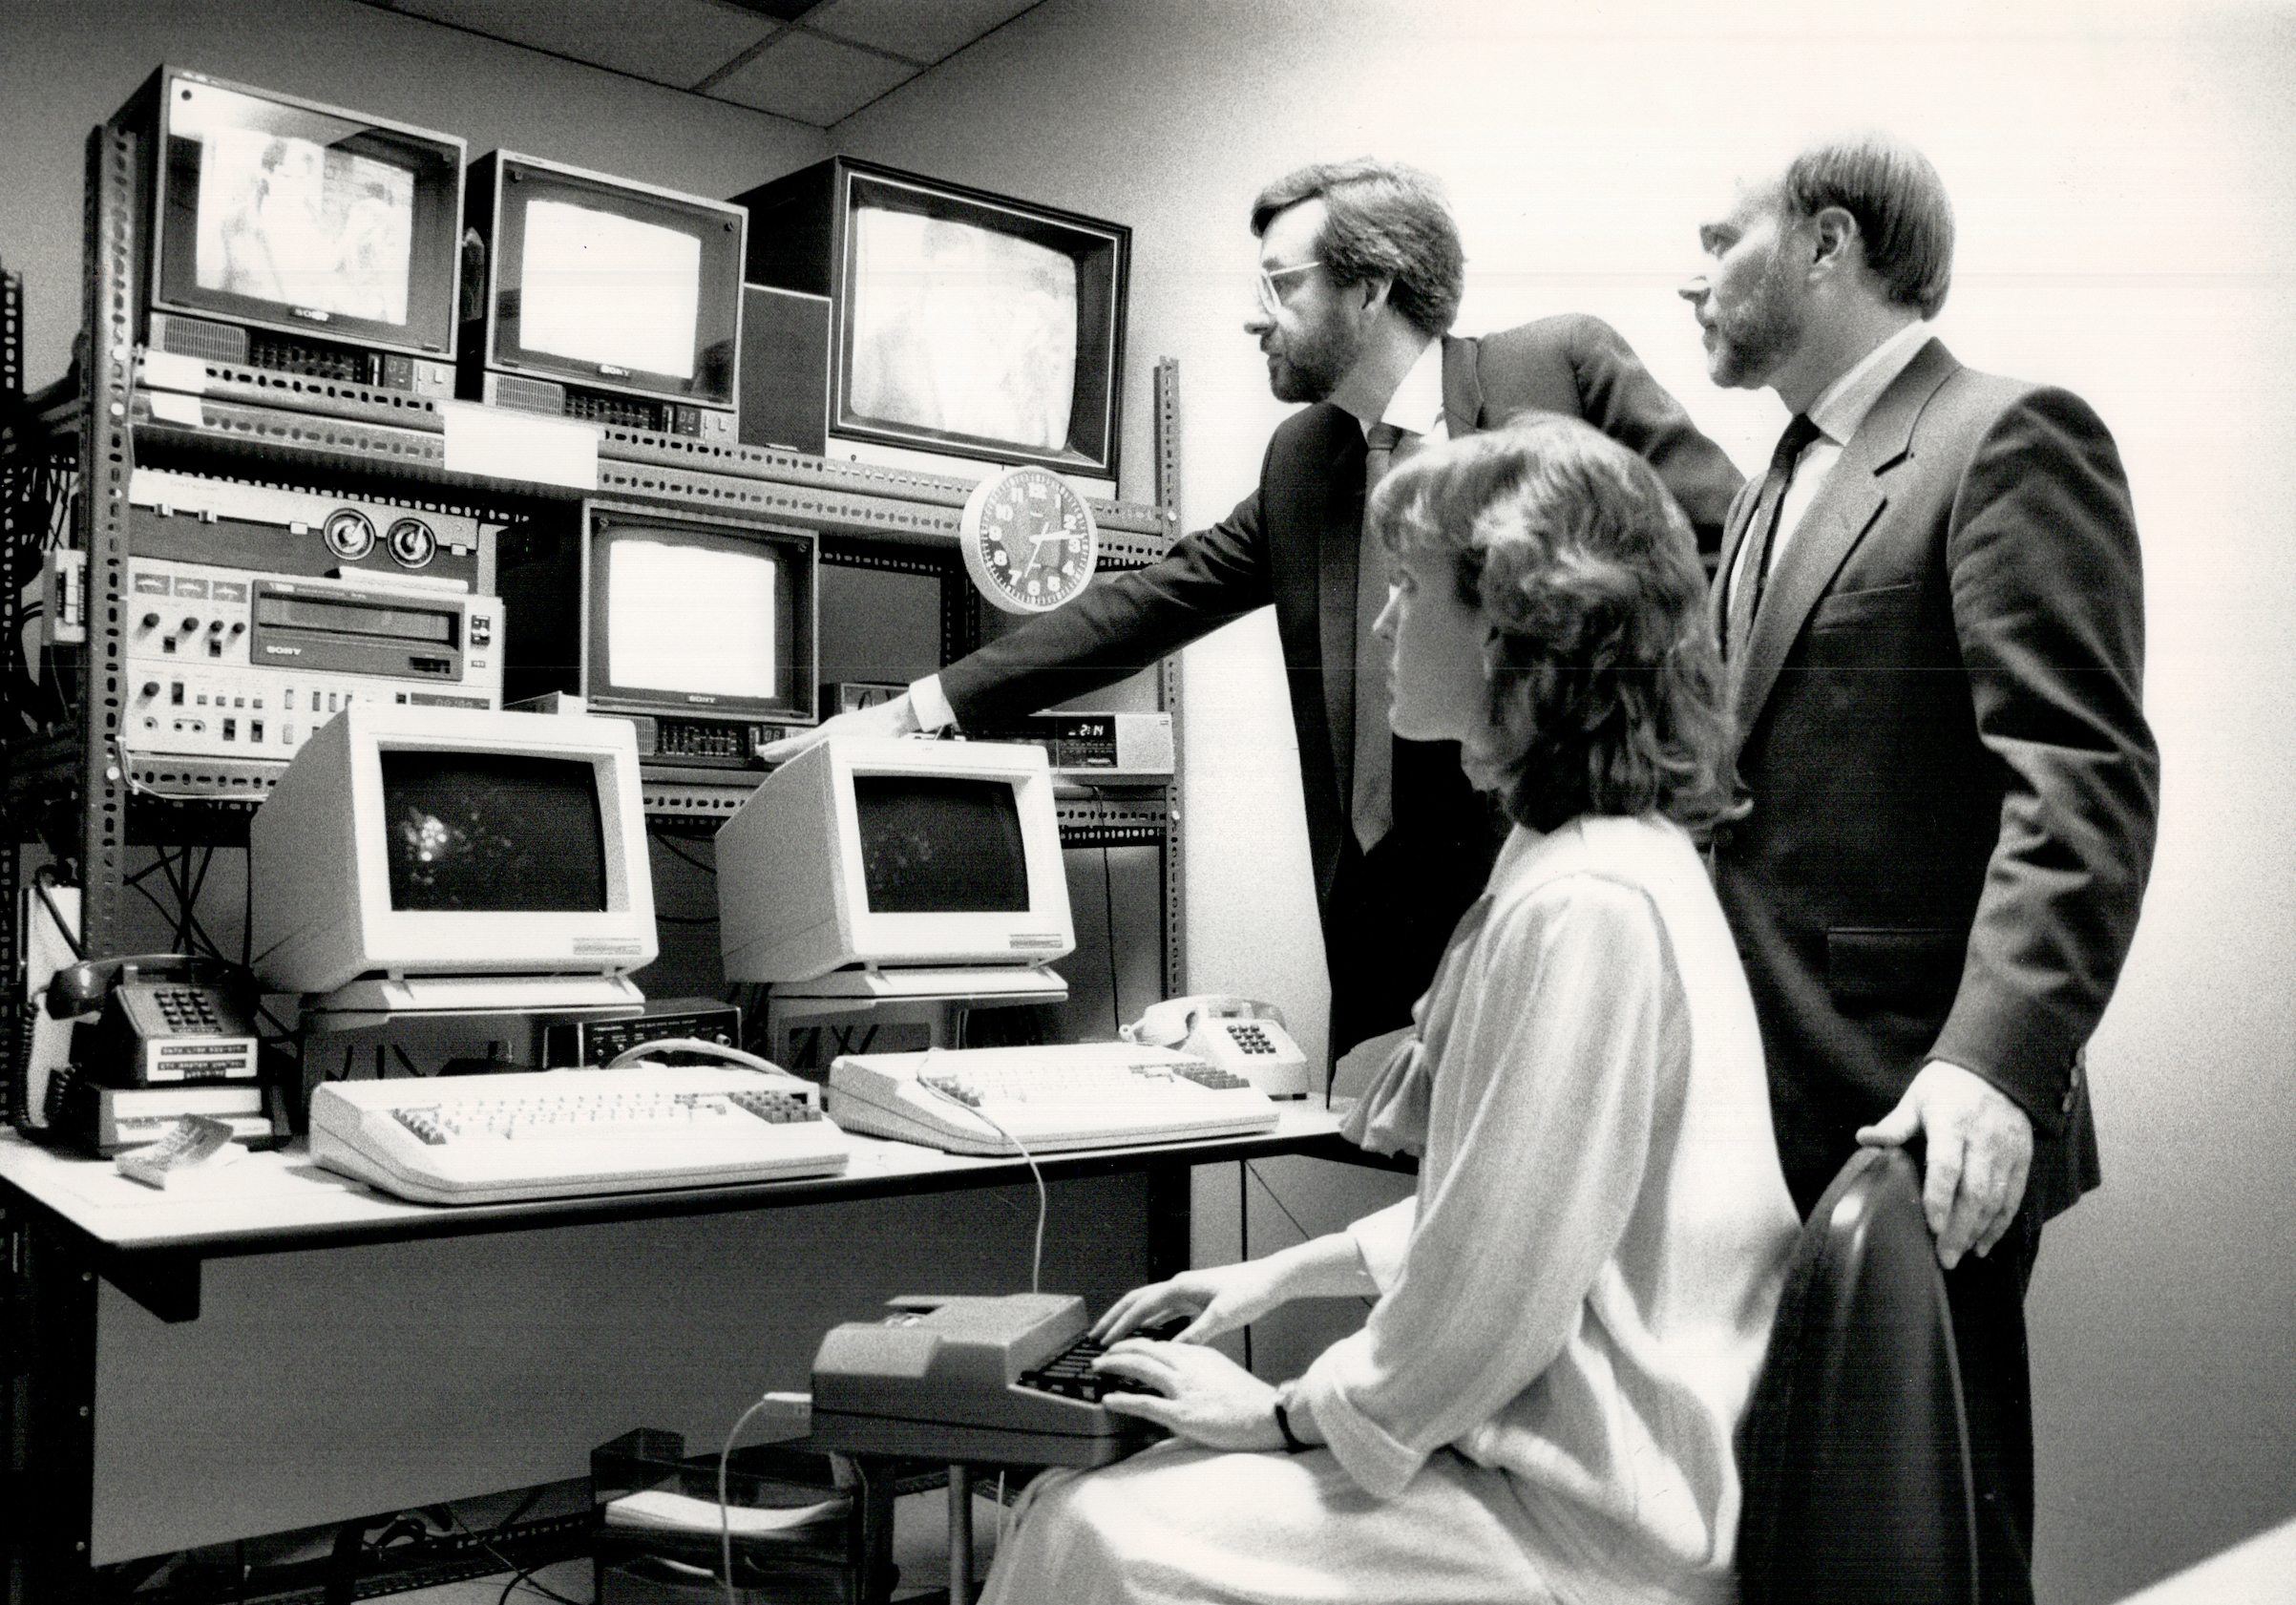 In 1988, three Canadian Captioning Development Agency employees watch television monitors in a studio where closed captioning is done. (Toronto Star via Getty Images)